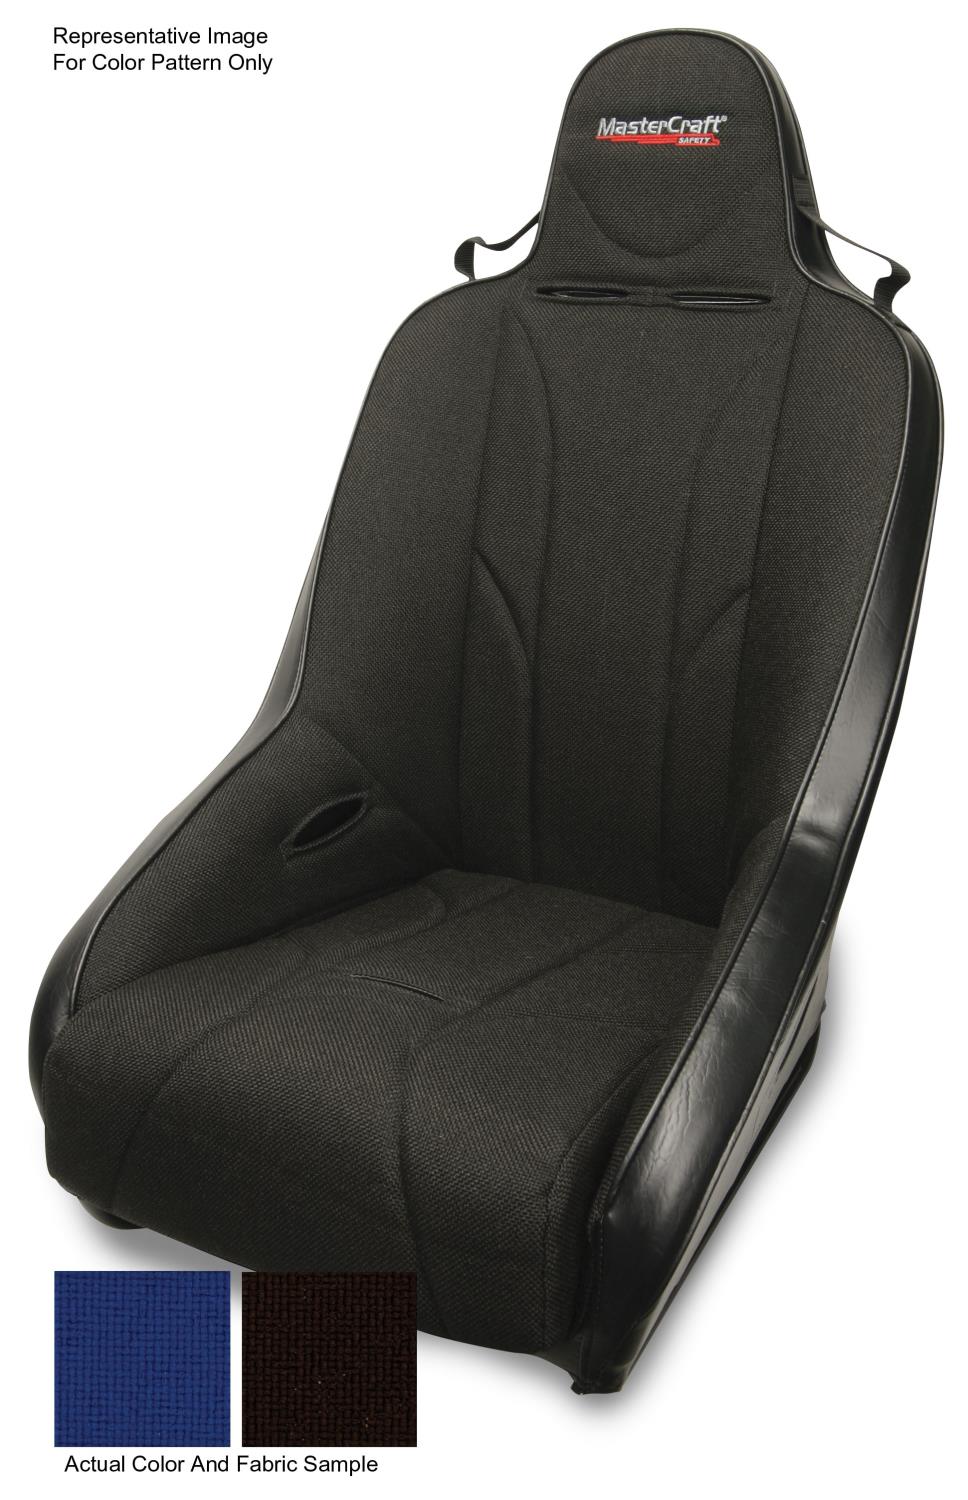 561213 2 in. WIDER PROSeat w/Fixed Headrest, Black with Black Fabric Removable Cushion, Blue Side Panels, Black Band